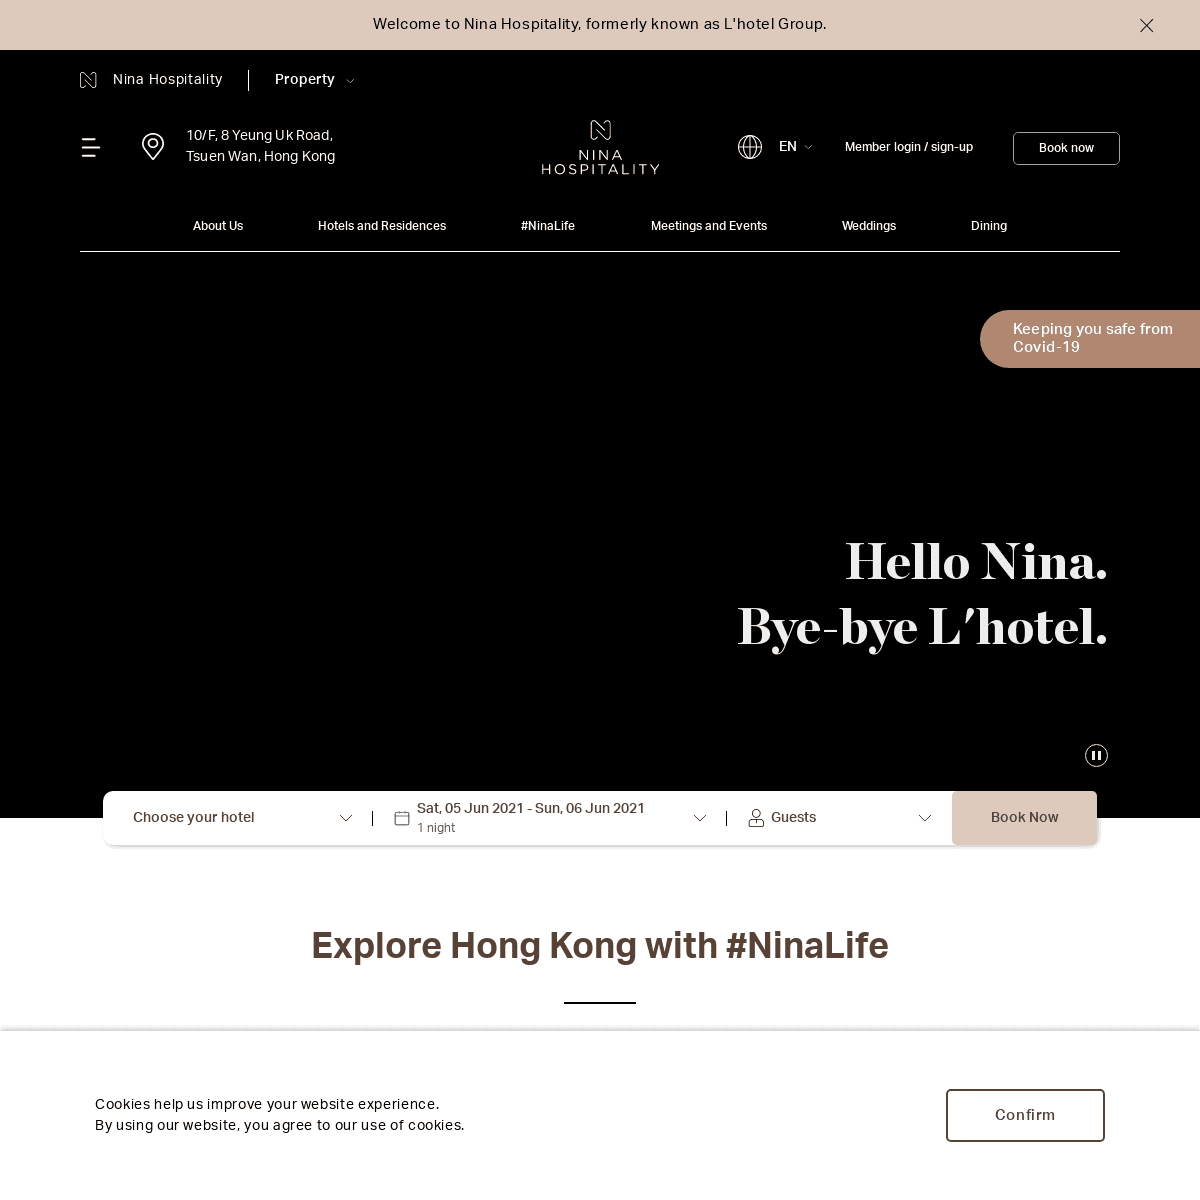 A complete backup of https://lhotelgroup.com